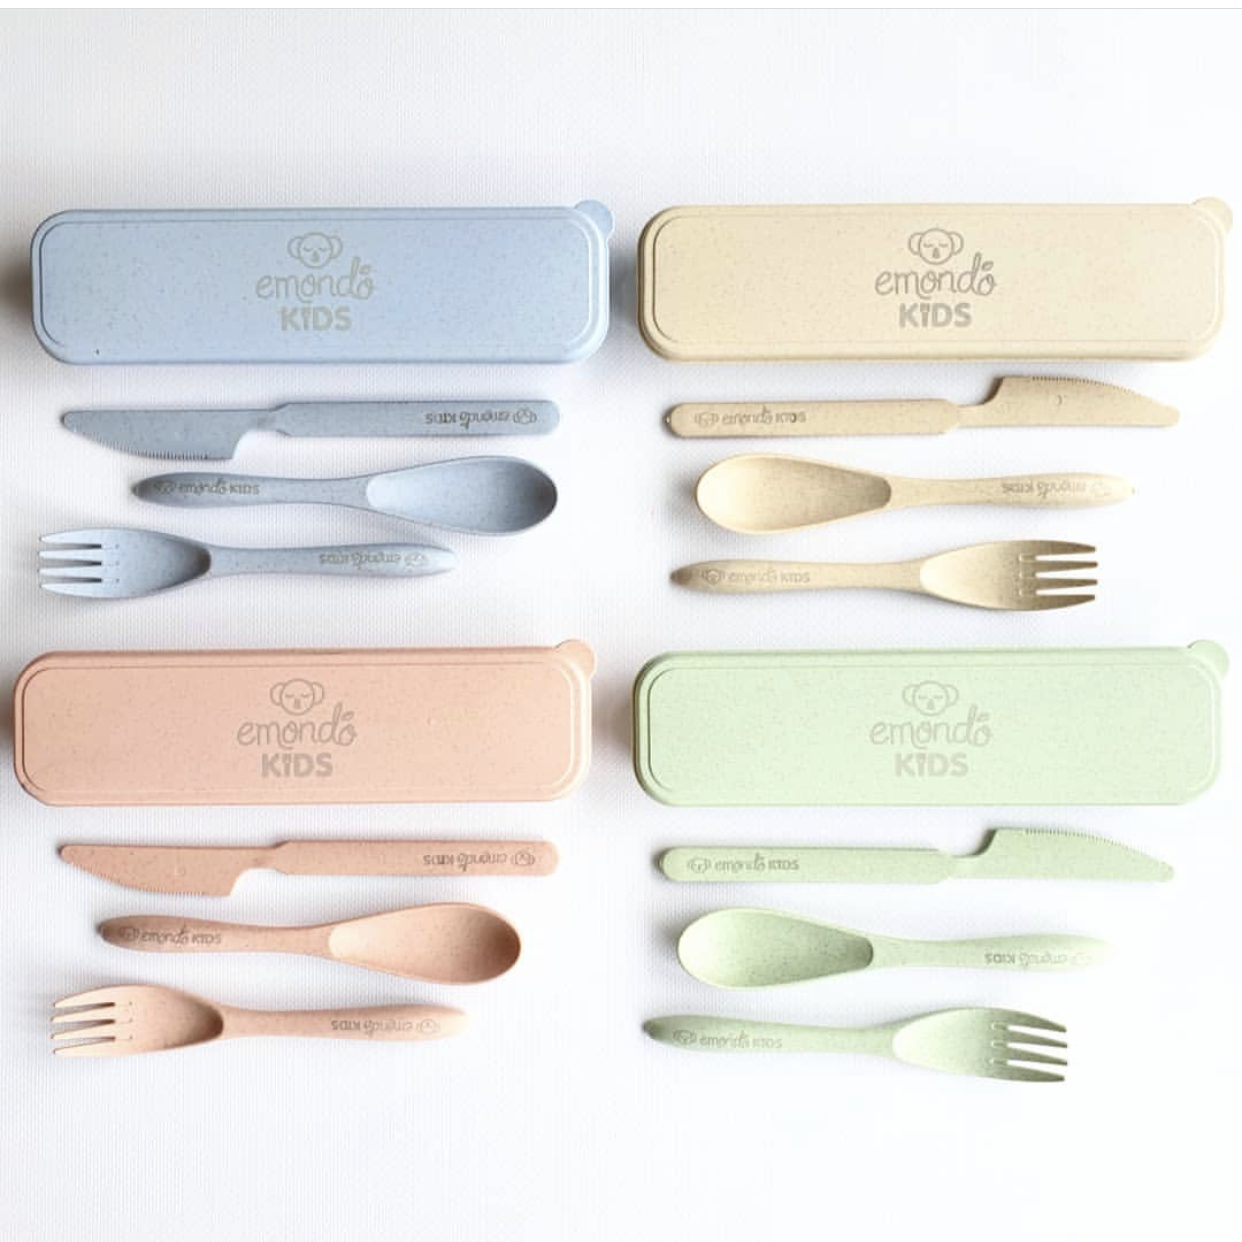 Eco Cutlery Set: Each box contains 1 x fork, 1 x knife, 1 x spoon.